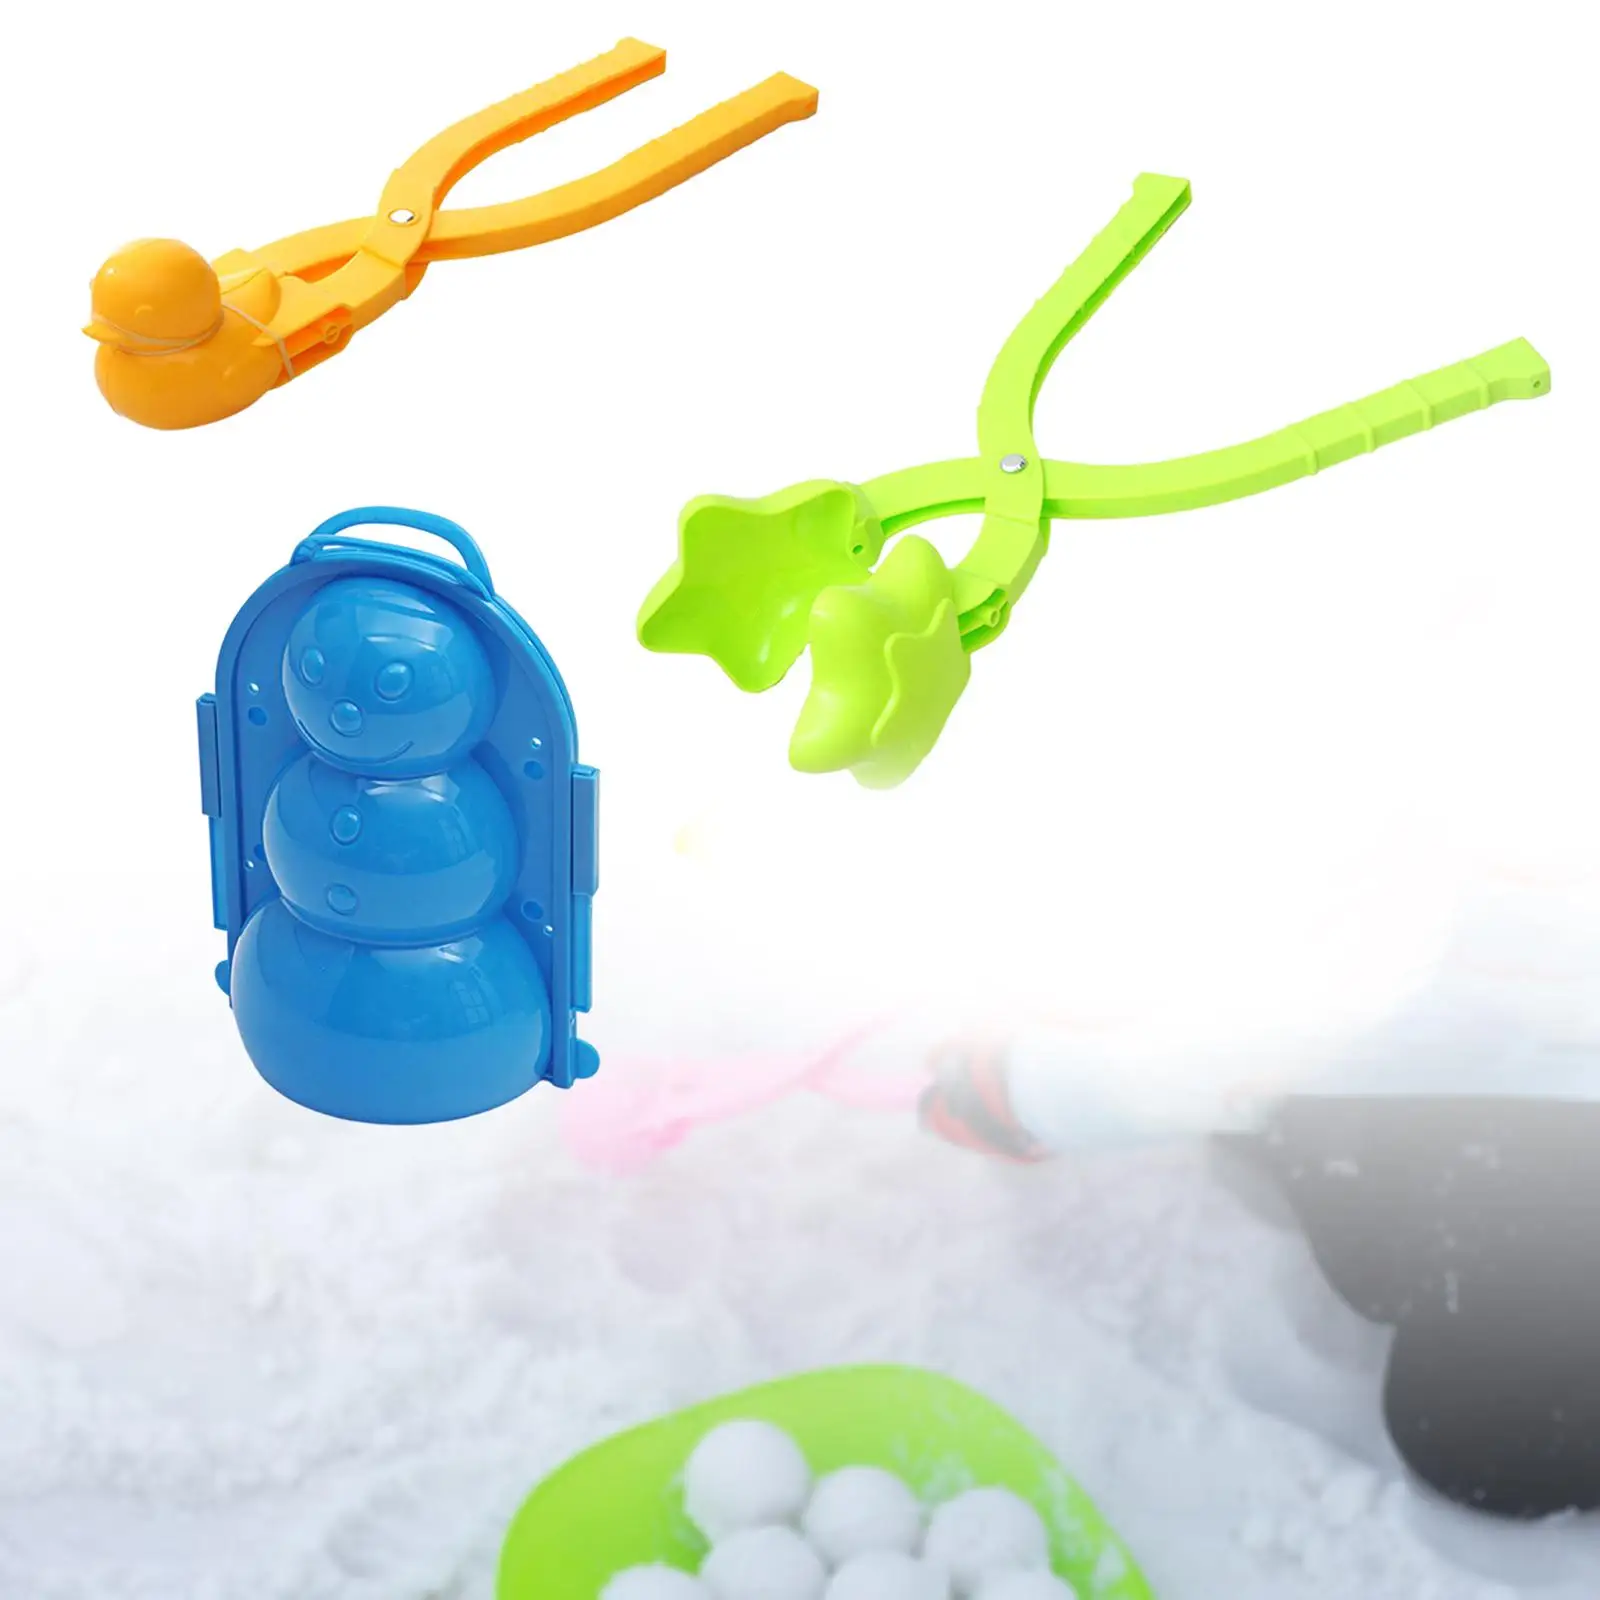 Portable Snowball Clamp Wear Resistant Practical Gifts Adorable Snow Ball Making Tools for Outdoor Games Winter Girls Boys